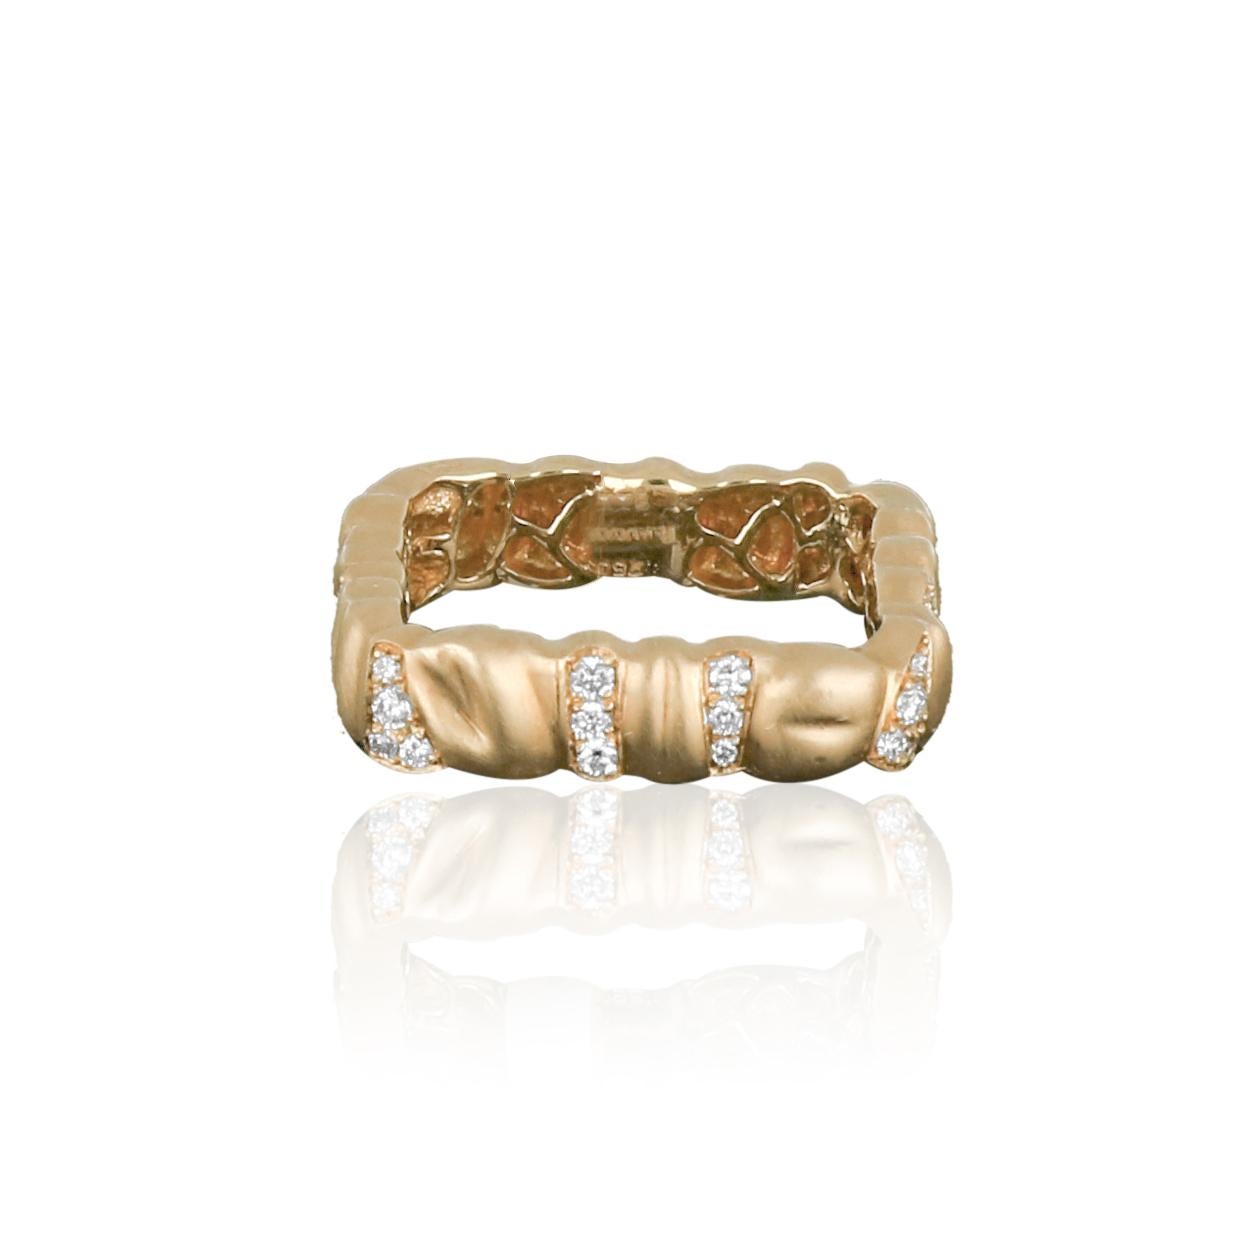 An elegant 18 karat matte yellow gold ring that showcases the timeless elegance of a square shapes, set to embrace the finger with remarkable flashing. The square classic design allows the natural beauty of each diamond to shine through.
18 Karat